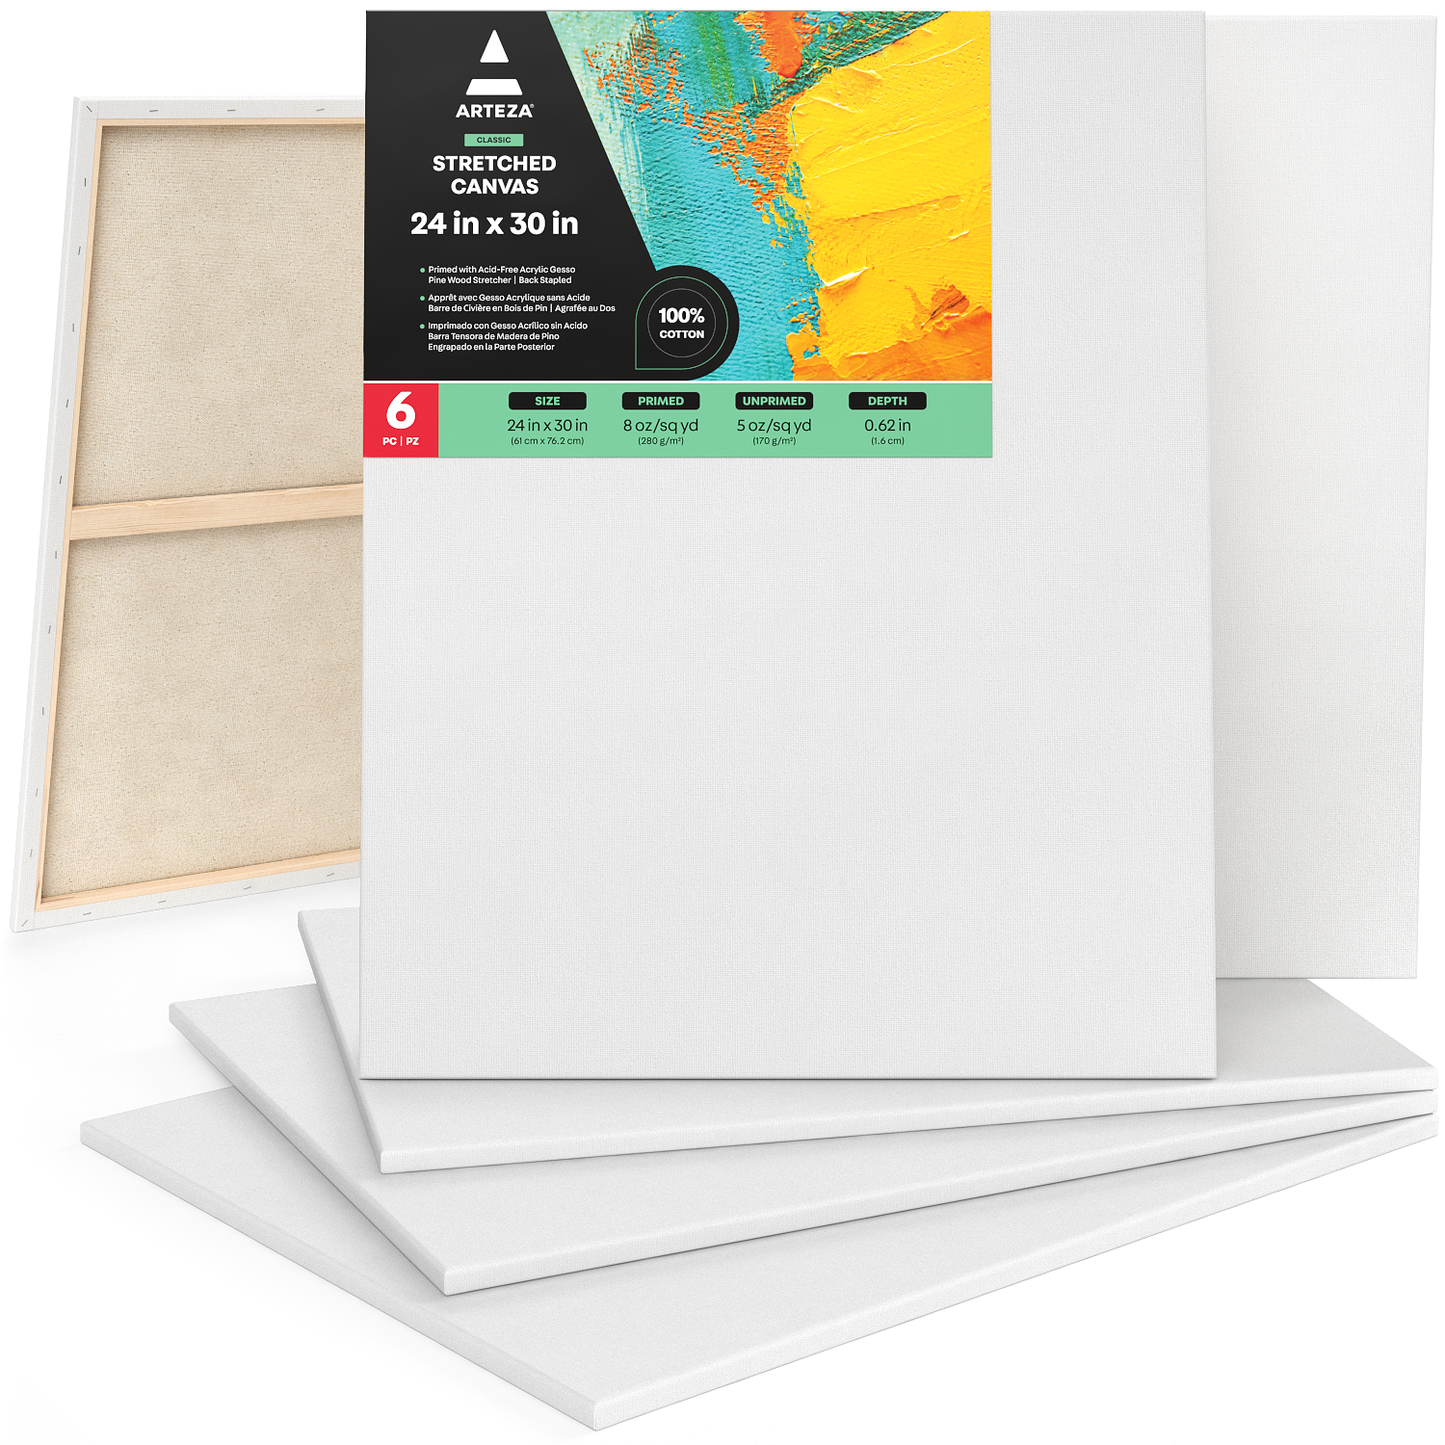 Classic Stretched Canvas, 24" x 30" - Pack of 6